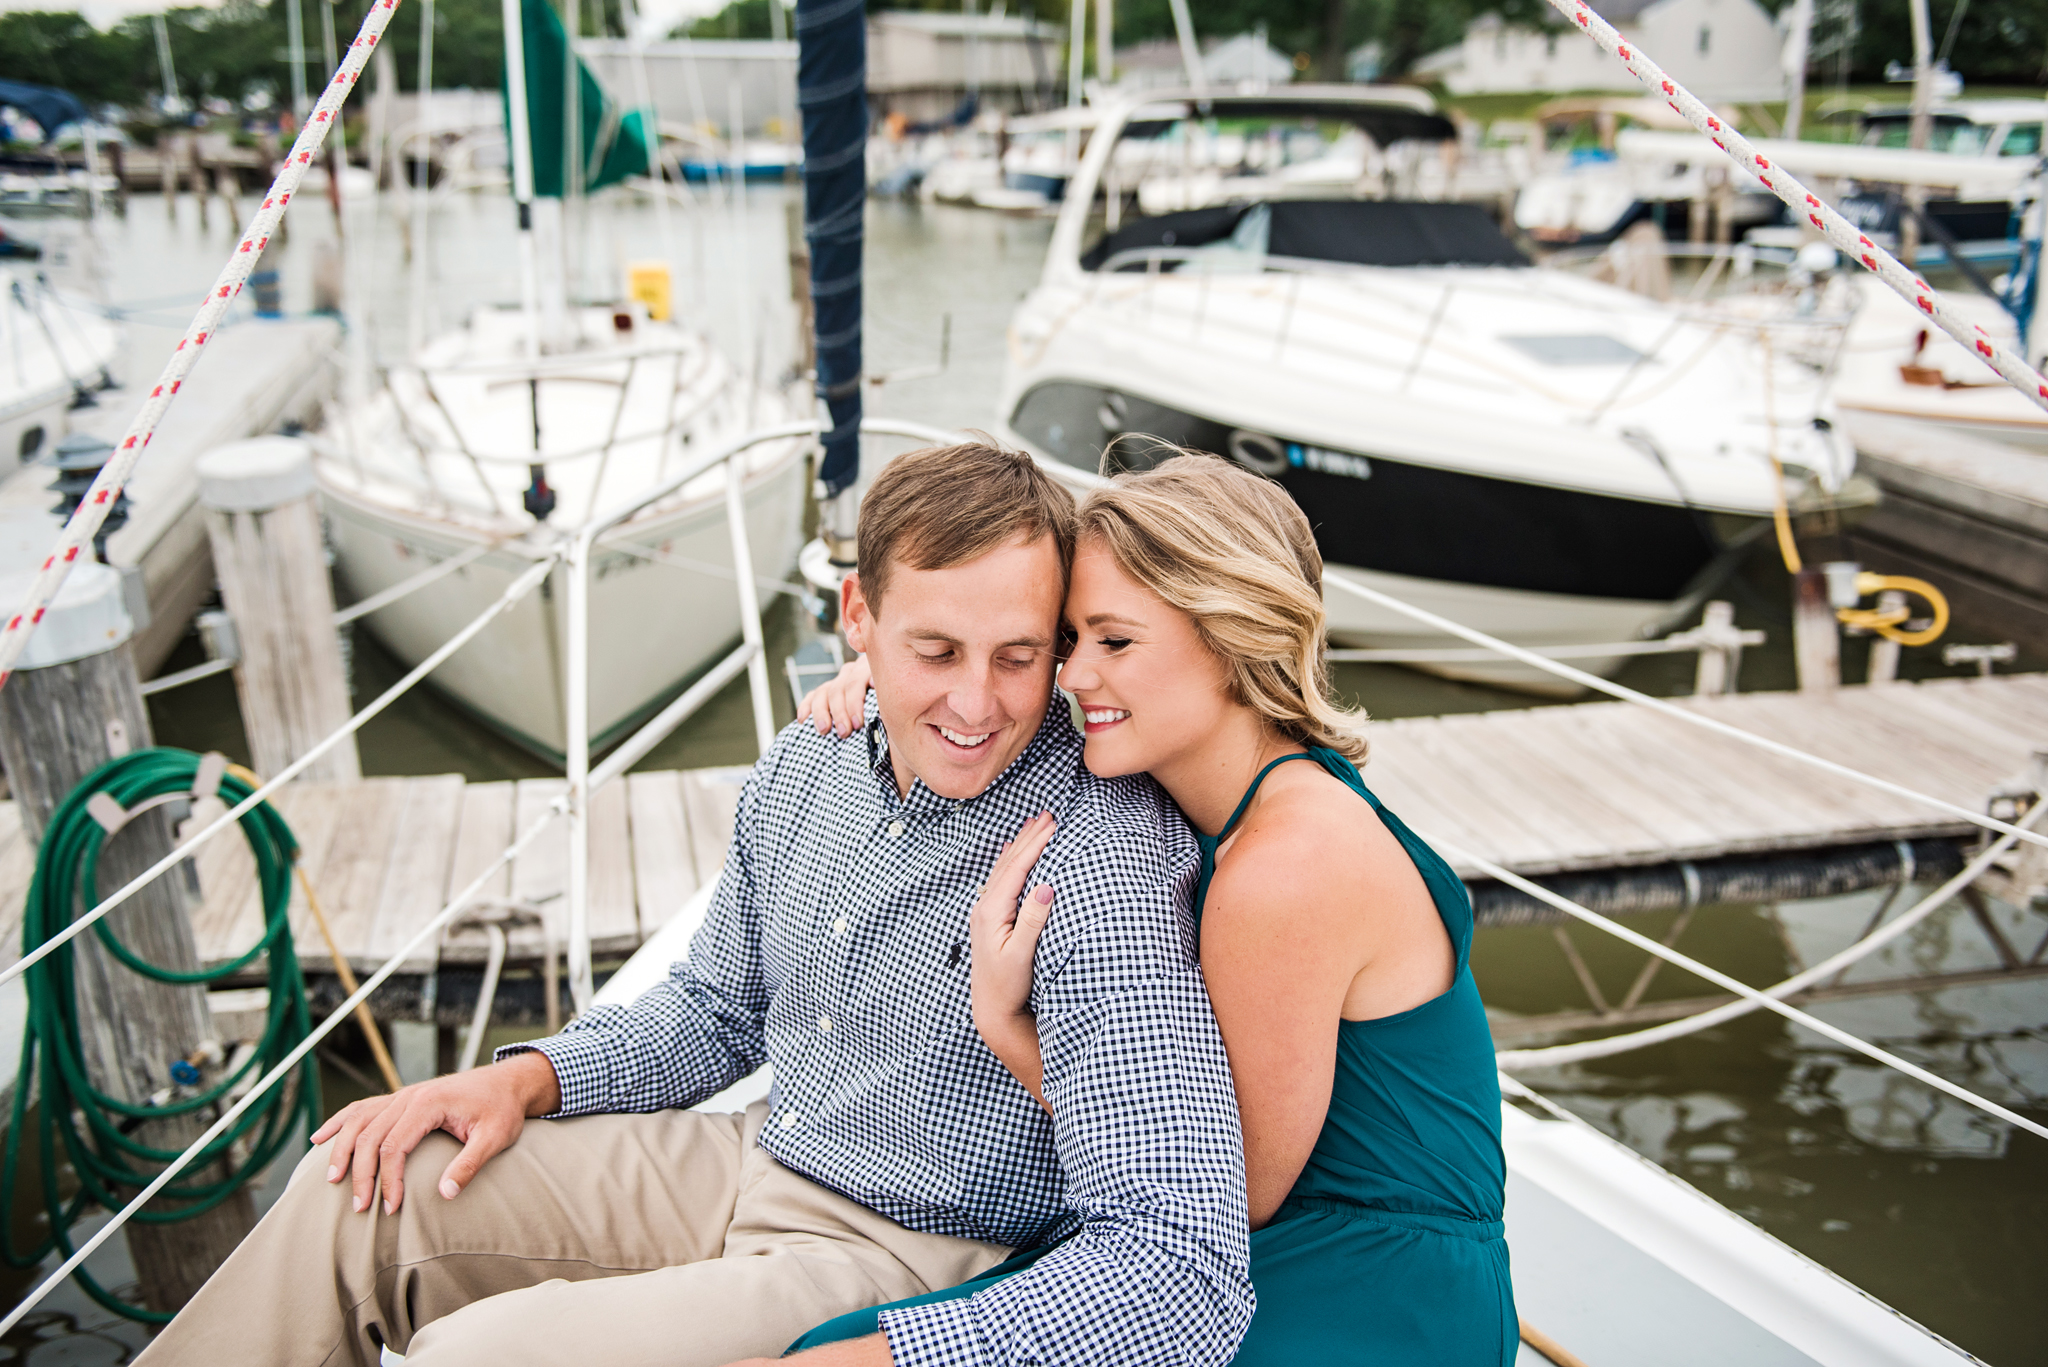 George_Eastman_House_Rochester_Yacht_Club_Rochester_Engagement_Session_JILL_STUDIO_Rochester_NY_Photographer_DSC_8187.jpg